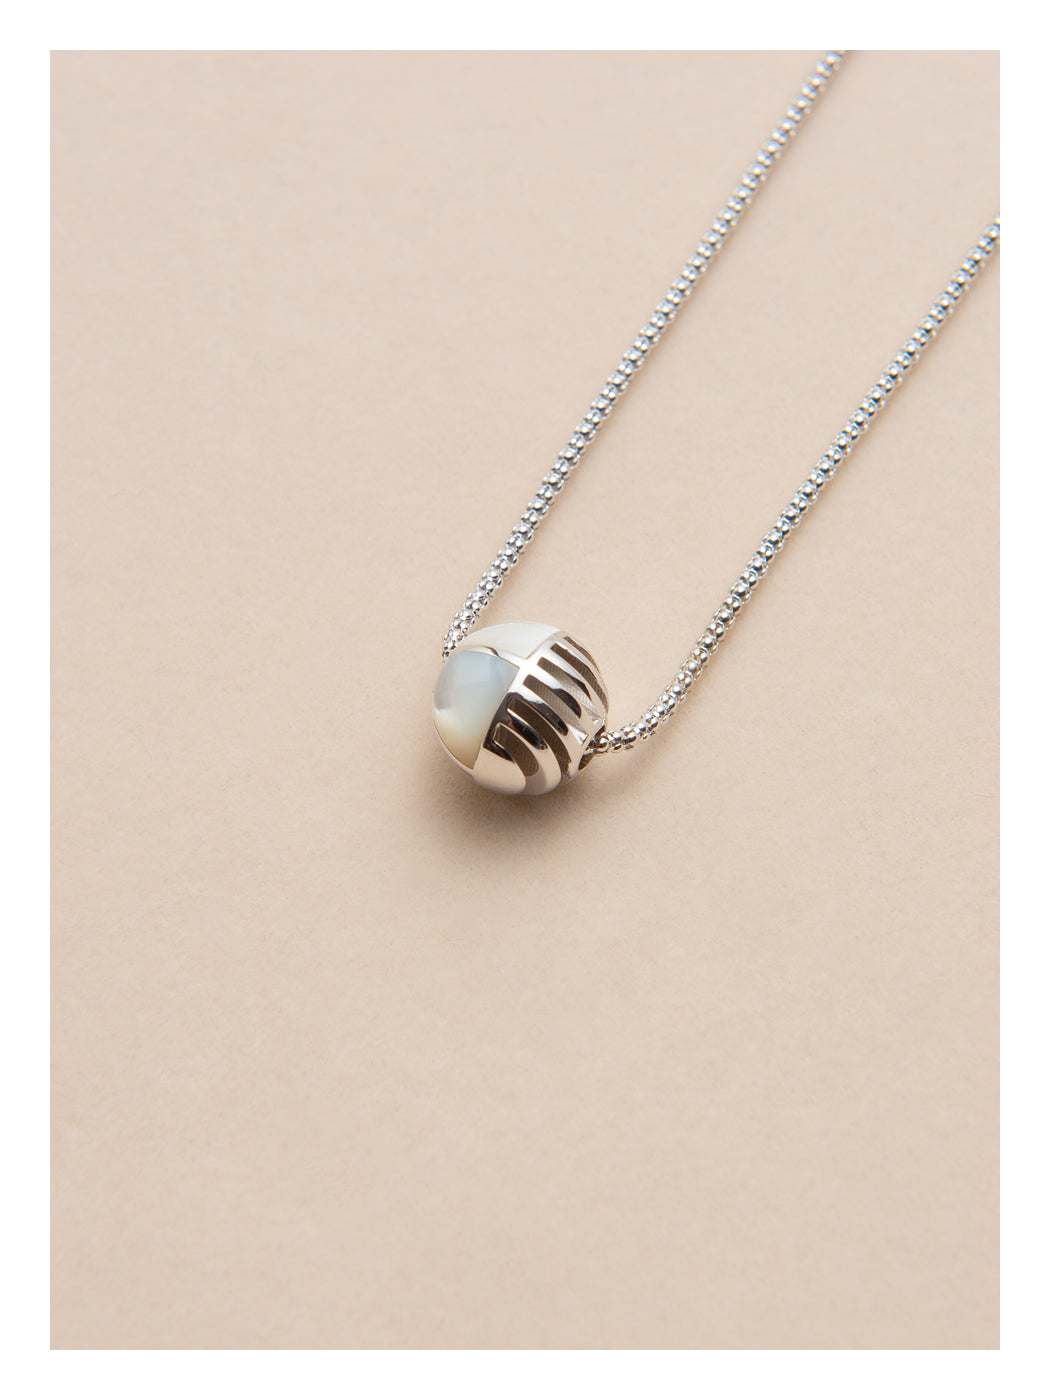 MICROPHONE PEARL PENDENT